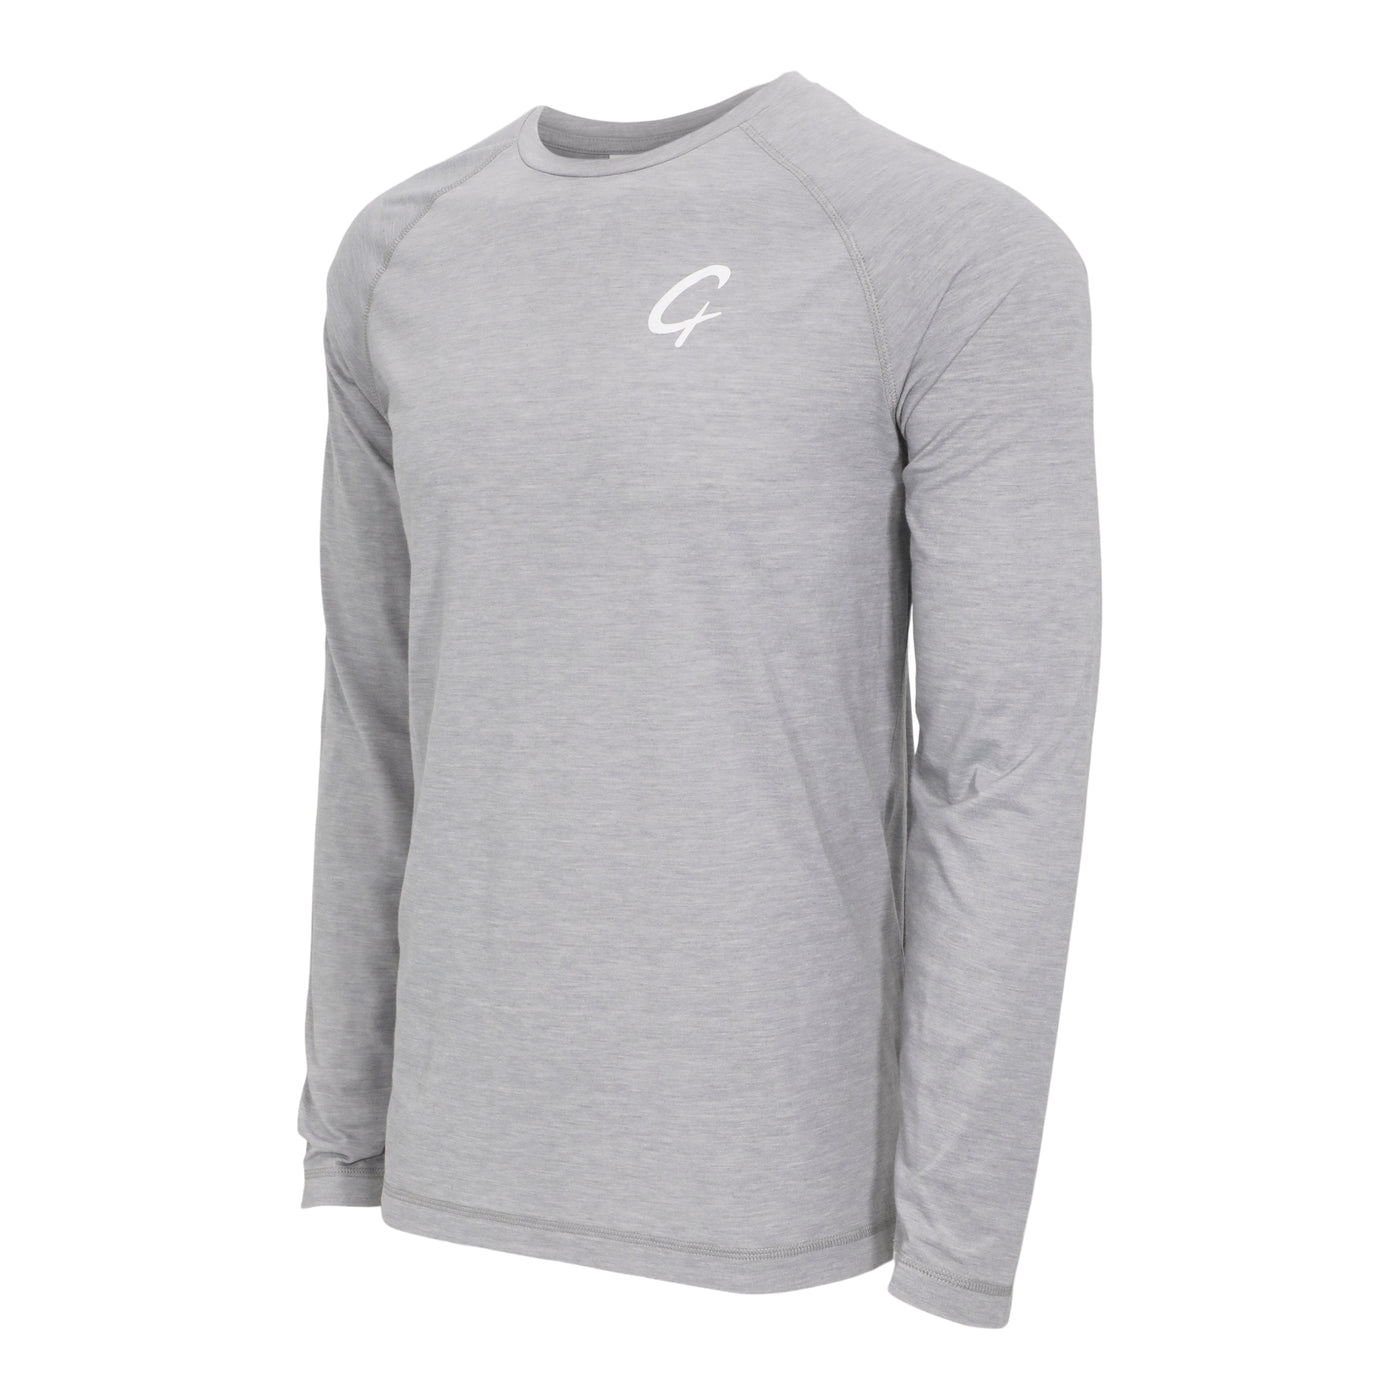 Created Compete light grey long sleeve diagonal view